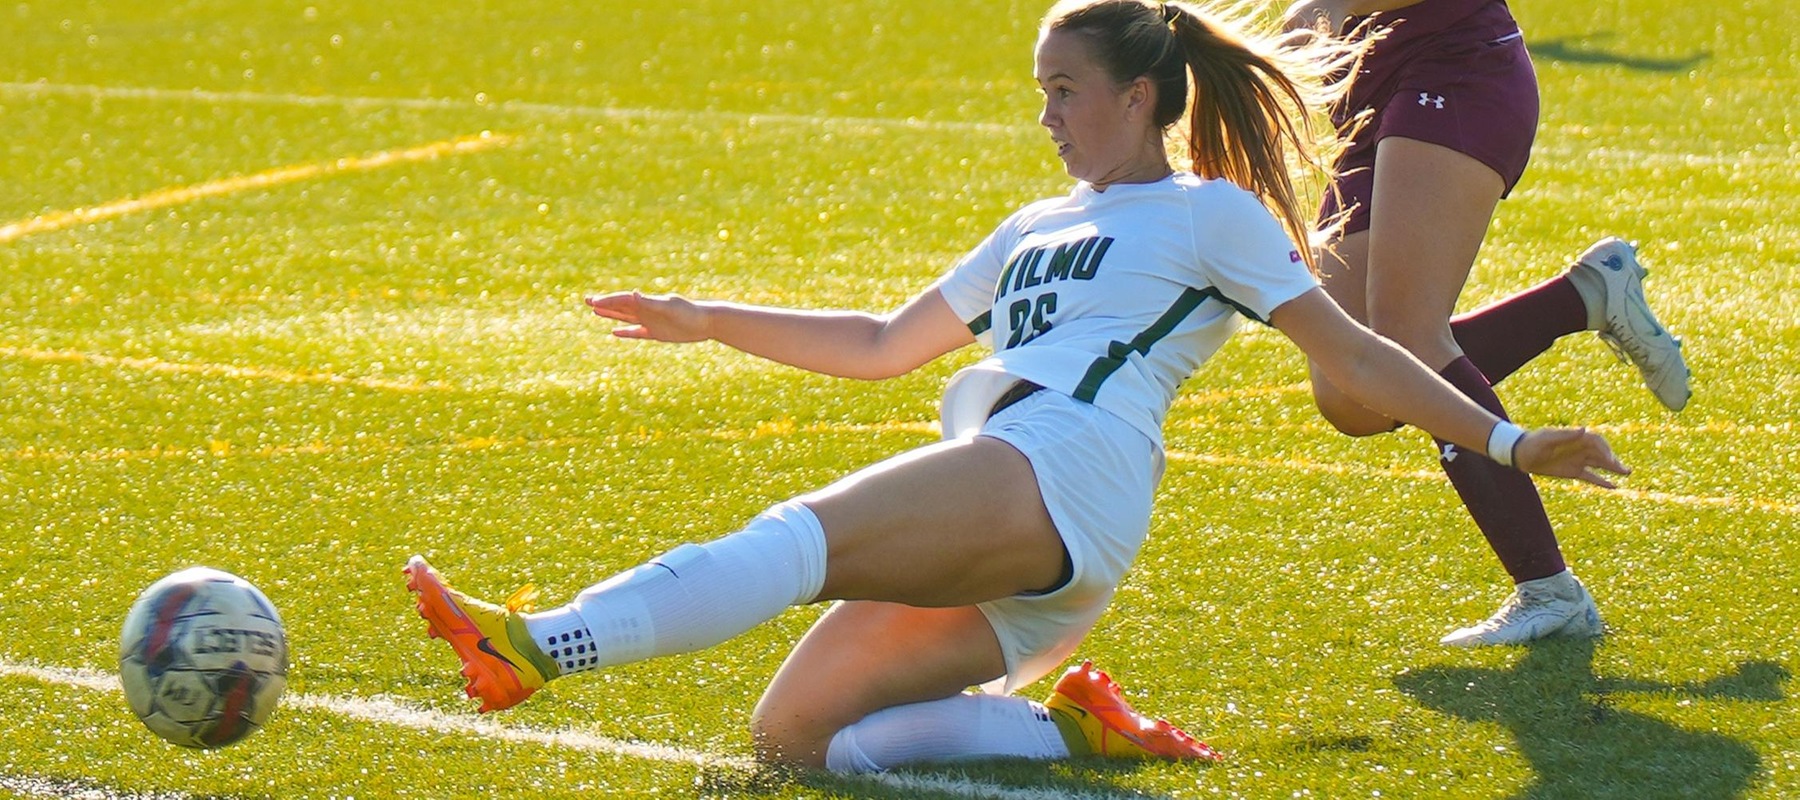 Wilmington University’s Brianna Wons ties the game, 1-1, with her first goal as a Wildcat during their NCAA Women’s Soccer Match at the Wilmington University Sports complex in Newark, Delaware, September 13, 2023 

Photo by Giovanni Badalamenti